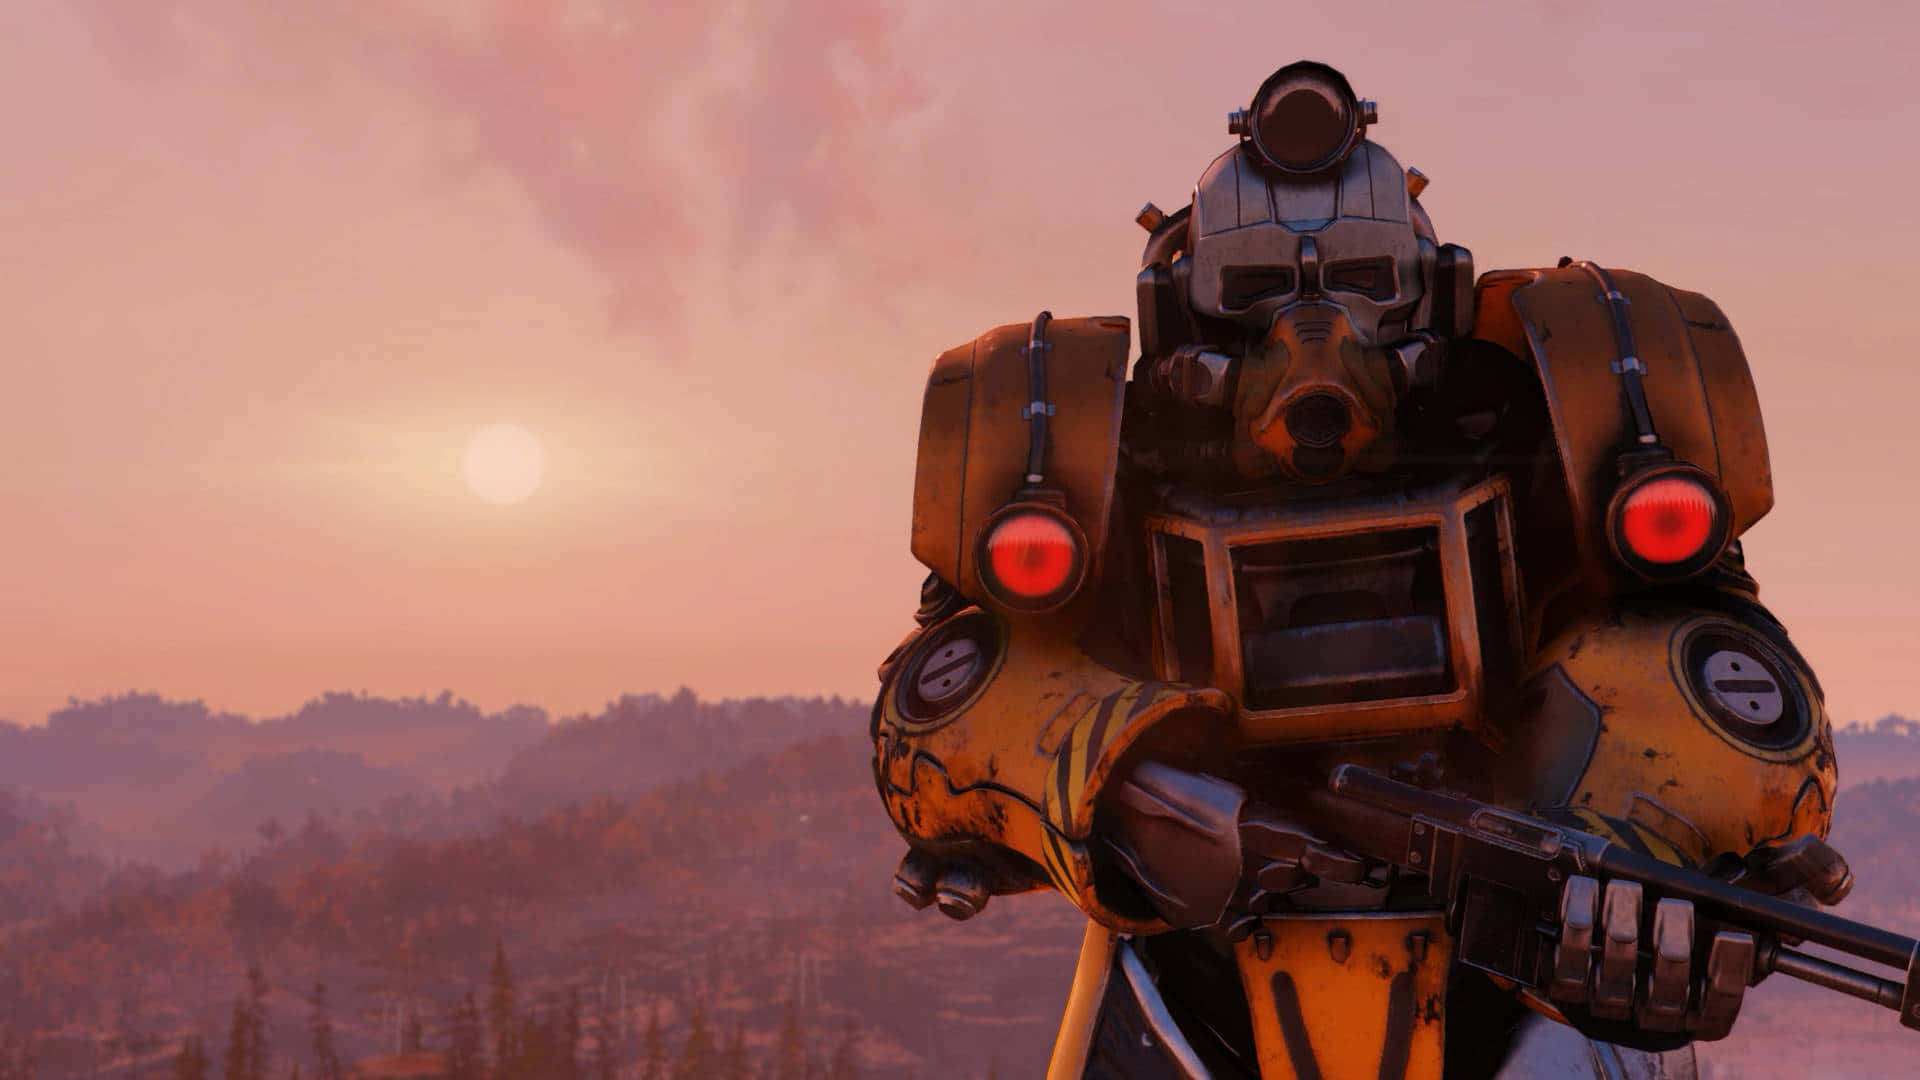 A formidable Fallout 4 Power Armor standing in the Wasteland Wallpaper